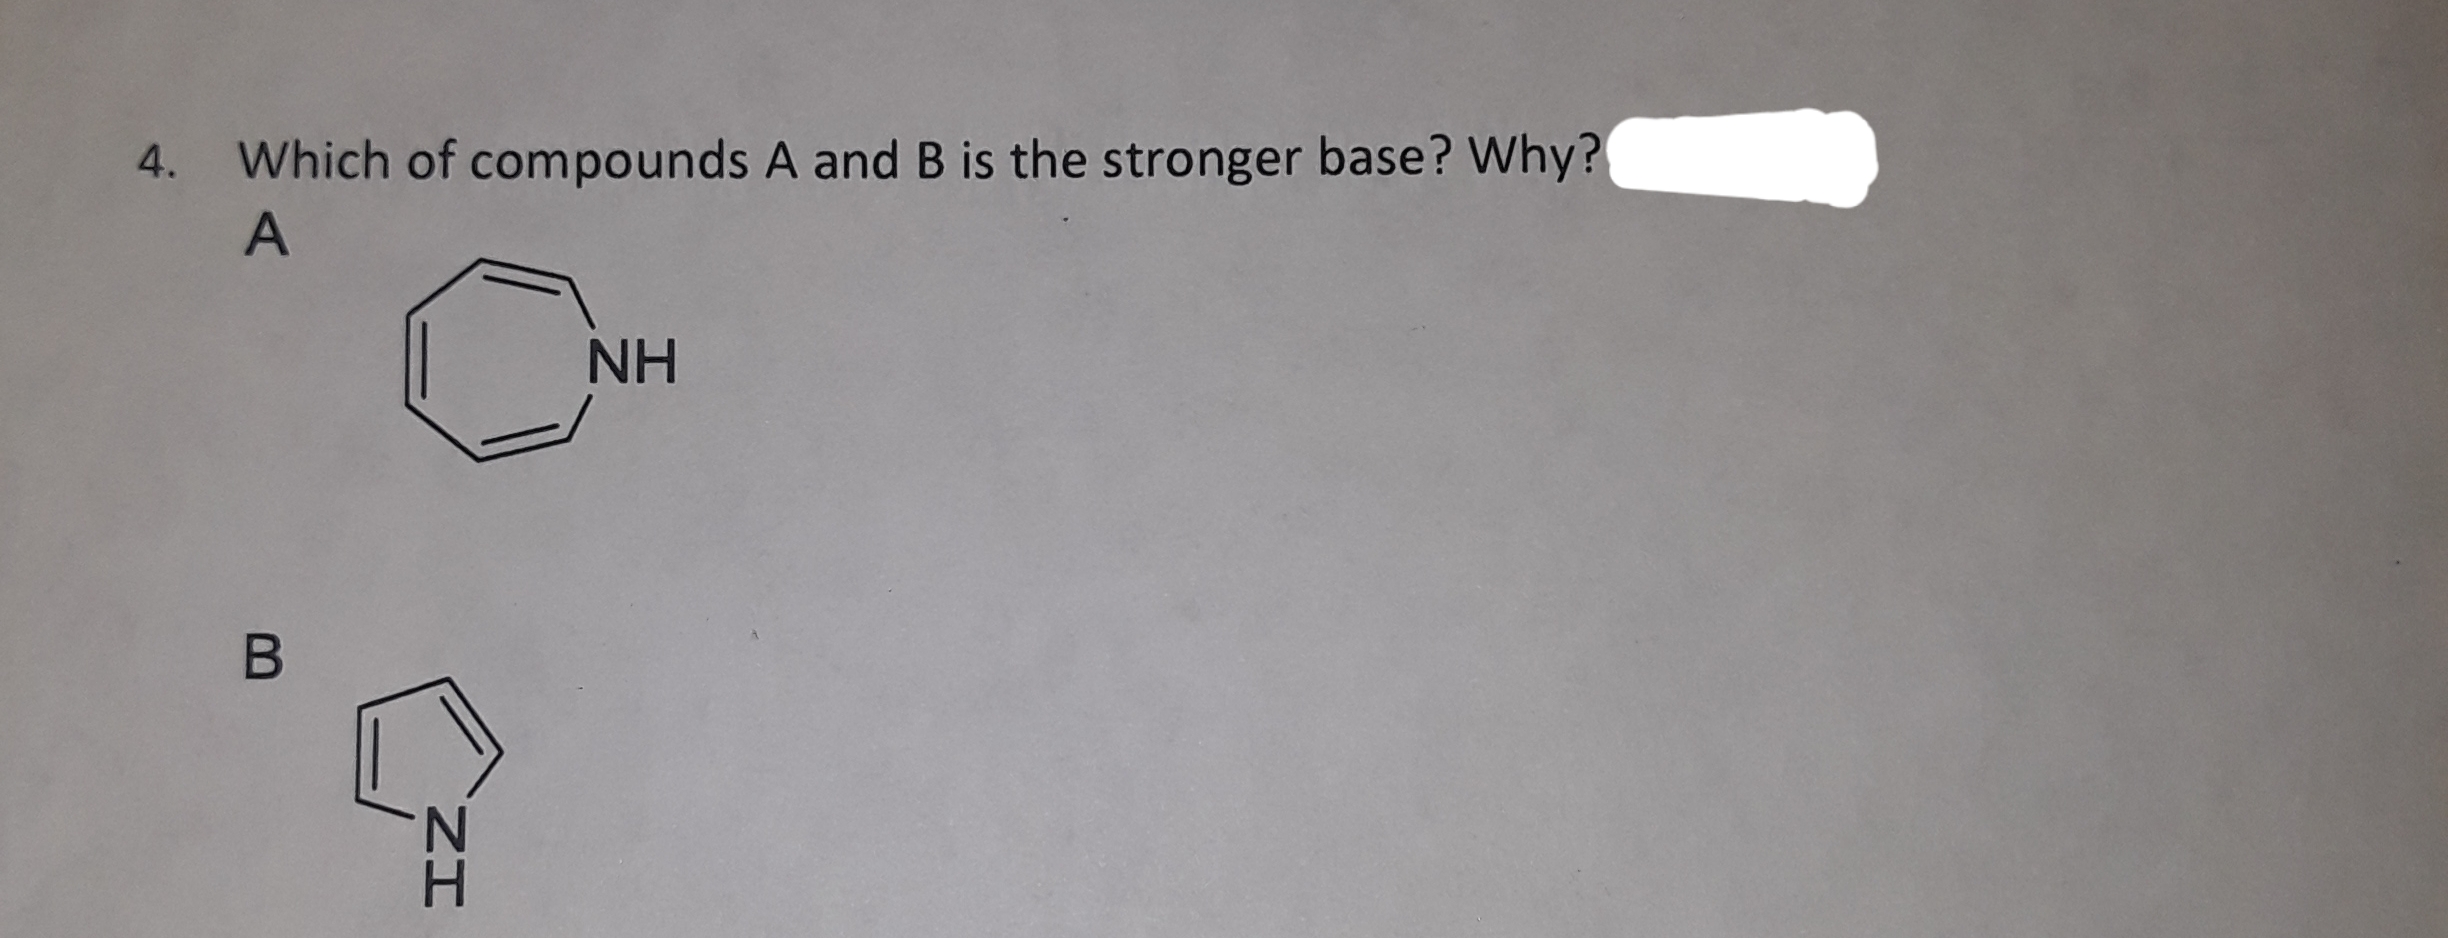 Which of compounds A and B is the stronger base? Why?
A
NH
N.
